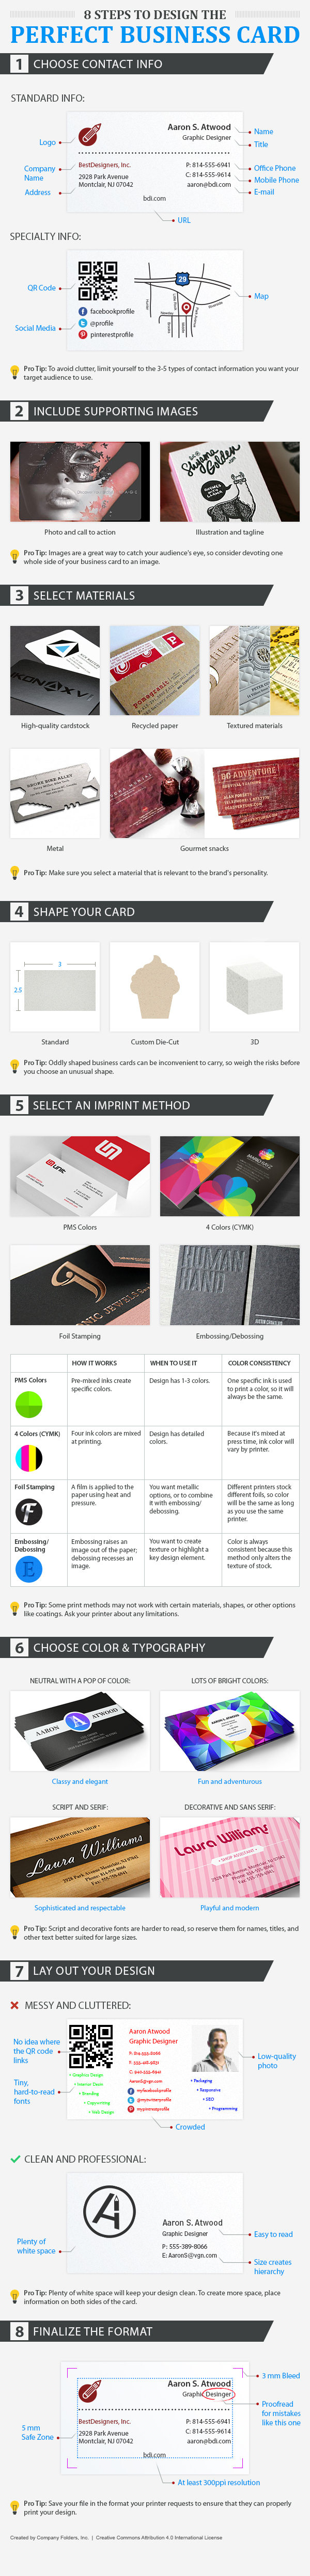 business card design tips infographic